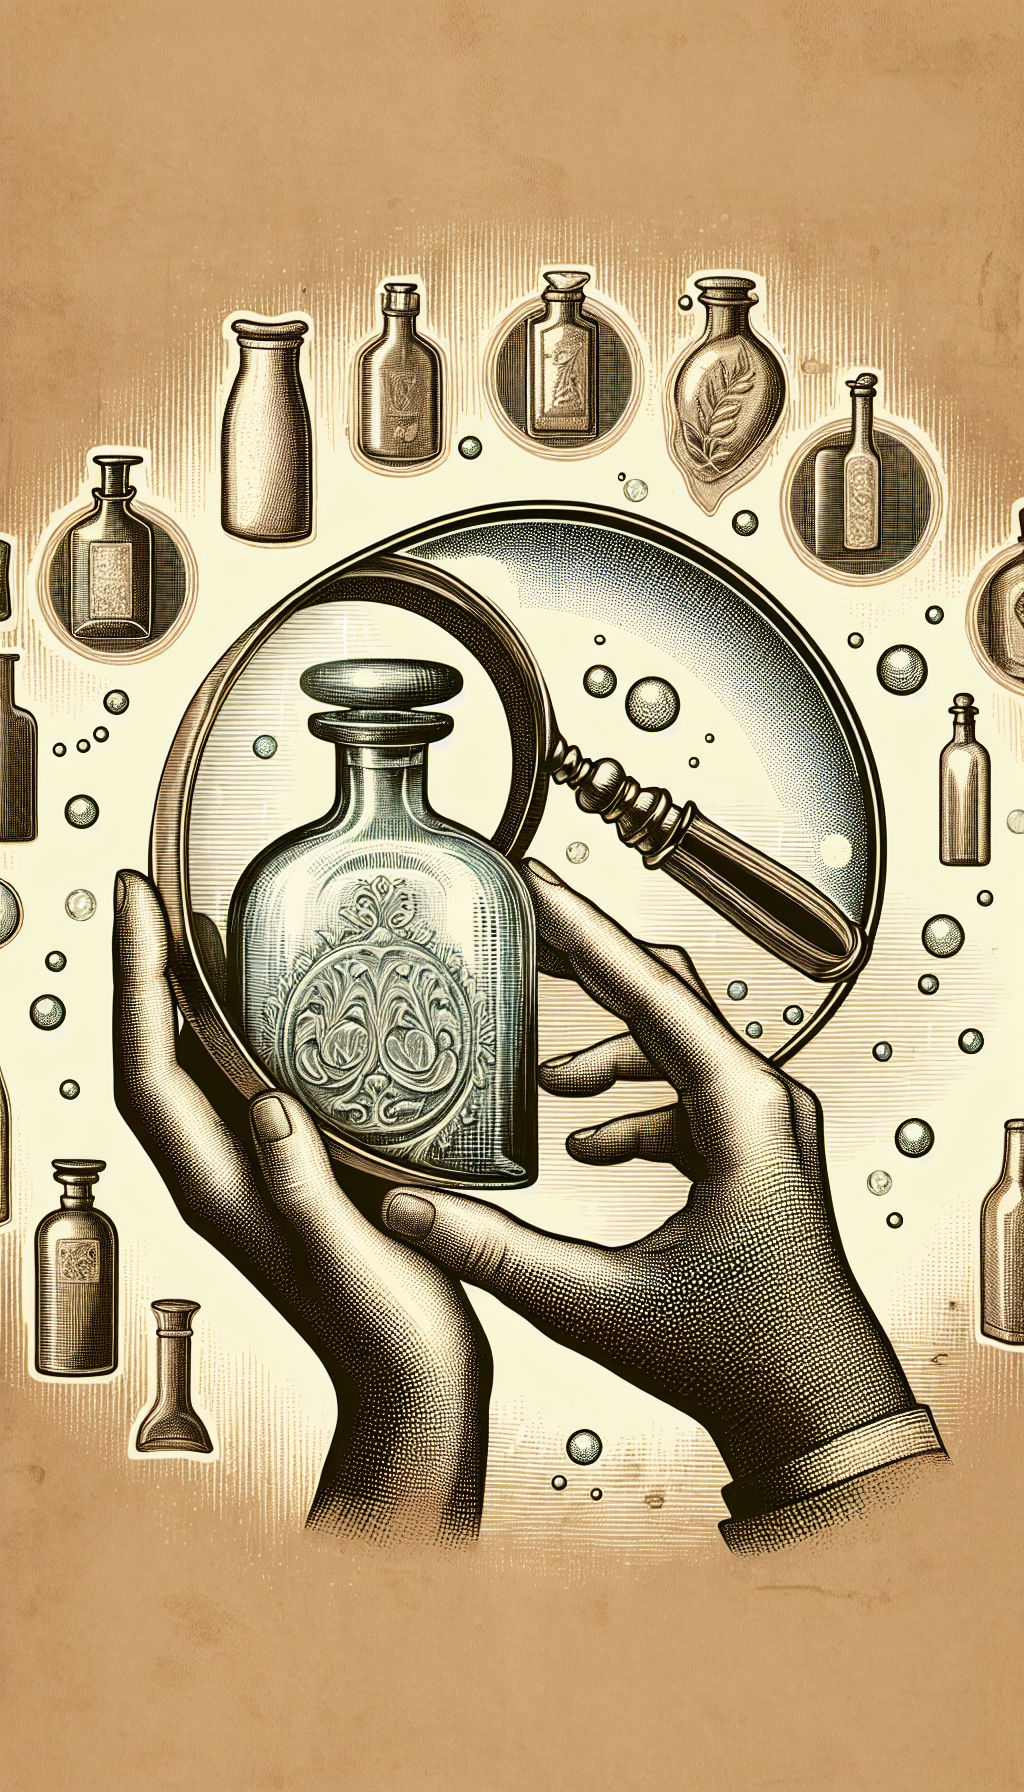 An illustration featuring a pair of hands gently cradling a transparent, antique bottle, with a magnifying glass hovering over the bottle's embossed markings. Delicate bubbles surround the bottle, symbolizing careful cleaning, while a sepia-toned background bears faint outlines of diverse historic bottles, emphasizing identification. The line art magnifying glass intersects styles—part detailed Victorian etching, part modern minimalist line drawing.